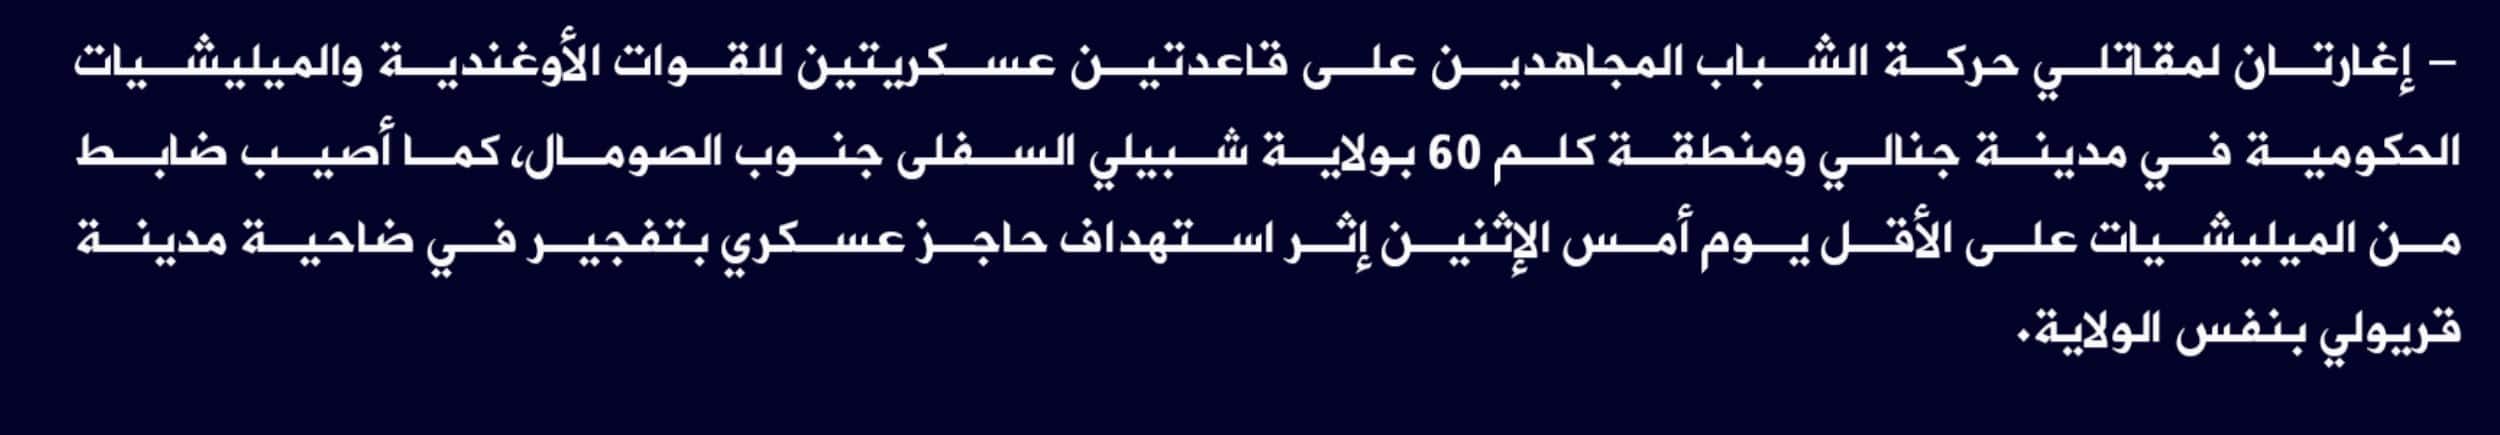 (Claim) al-Shabaab: Mujahideen Attacked an Ugandan and a Somalian Military Bases in Janali and 60 Km Area in Lower Shabelle State, Somalia - 10 May 2022